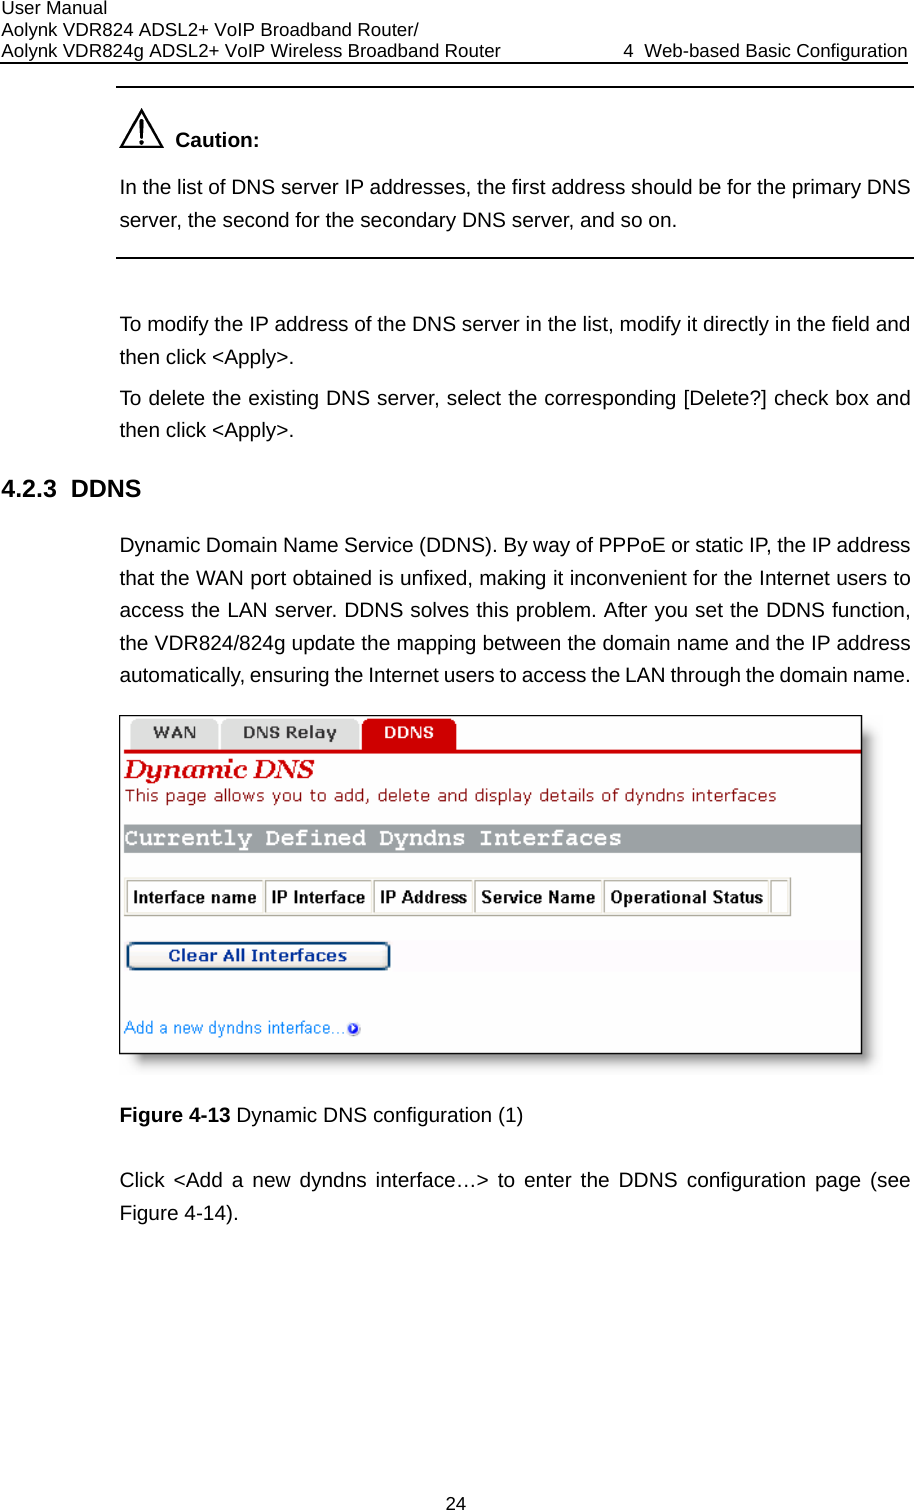 User Manual Aolynk VDR824 ADSL2+ VoIP Broadband Router/ Aolynk VDR824g ADSL2+ VoIP Wireless Broadband Router  4  Web-based Basic Configuration 24   Caution: In the list of DNS server IP addresses, the first address should be for the primary DNSserver, the second for the secondary DNS server, and so on.   To modify the IP address of the DNS server in the list, modify it directly in the field and then click &lt;Apply&gt;. To delete the existing DNS server, select the corresponding [Delete?] check box andthen click &lt;Apply&gt;. Dynamic Domain Name Service (DDNS). By way of PPPoE or static IP, the IP addr 4.2.3  DDNS ss AN port obtained is unfixed, making it inconvenient for the Internet users to  problem. After you set the DDNS function, the VDR824/824g update the mapping between the domain name and the IP address o access the LAN through the domain name. ethat the Waccess the LAN server. DDNS solves thisautomatically, ensuring the Internet users t Figure 4-13 Dynamic DNS configuration (1) Click &lt;Add a new dyndns interface…&gt; to enter the DDNS configuration page (see Figure 4-14). 